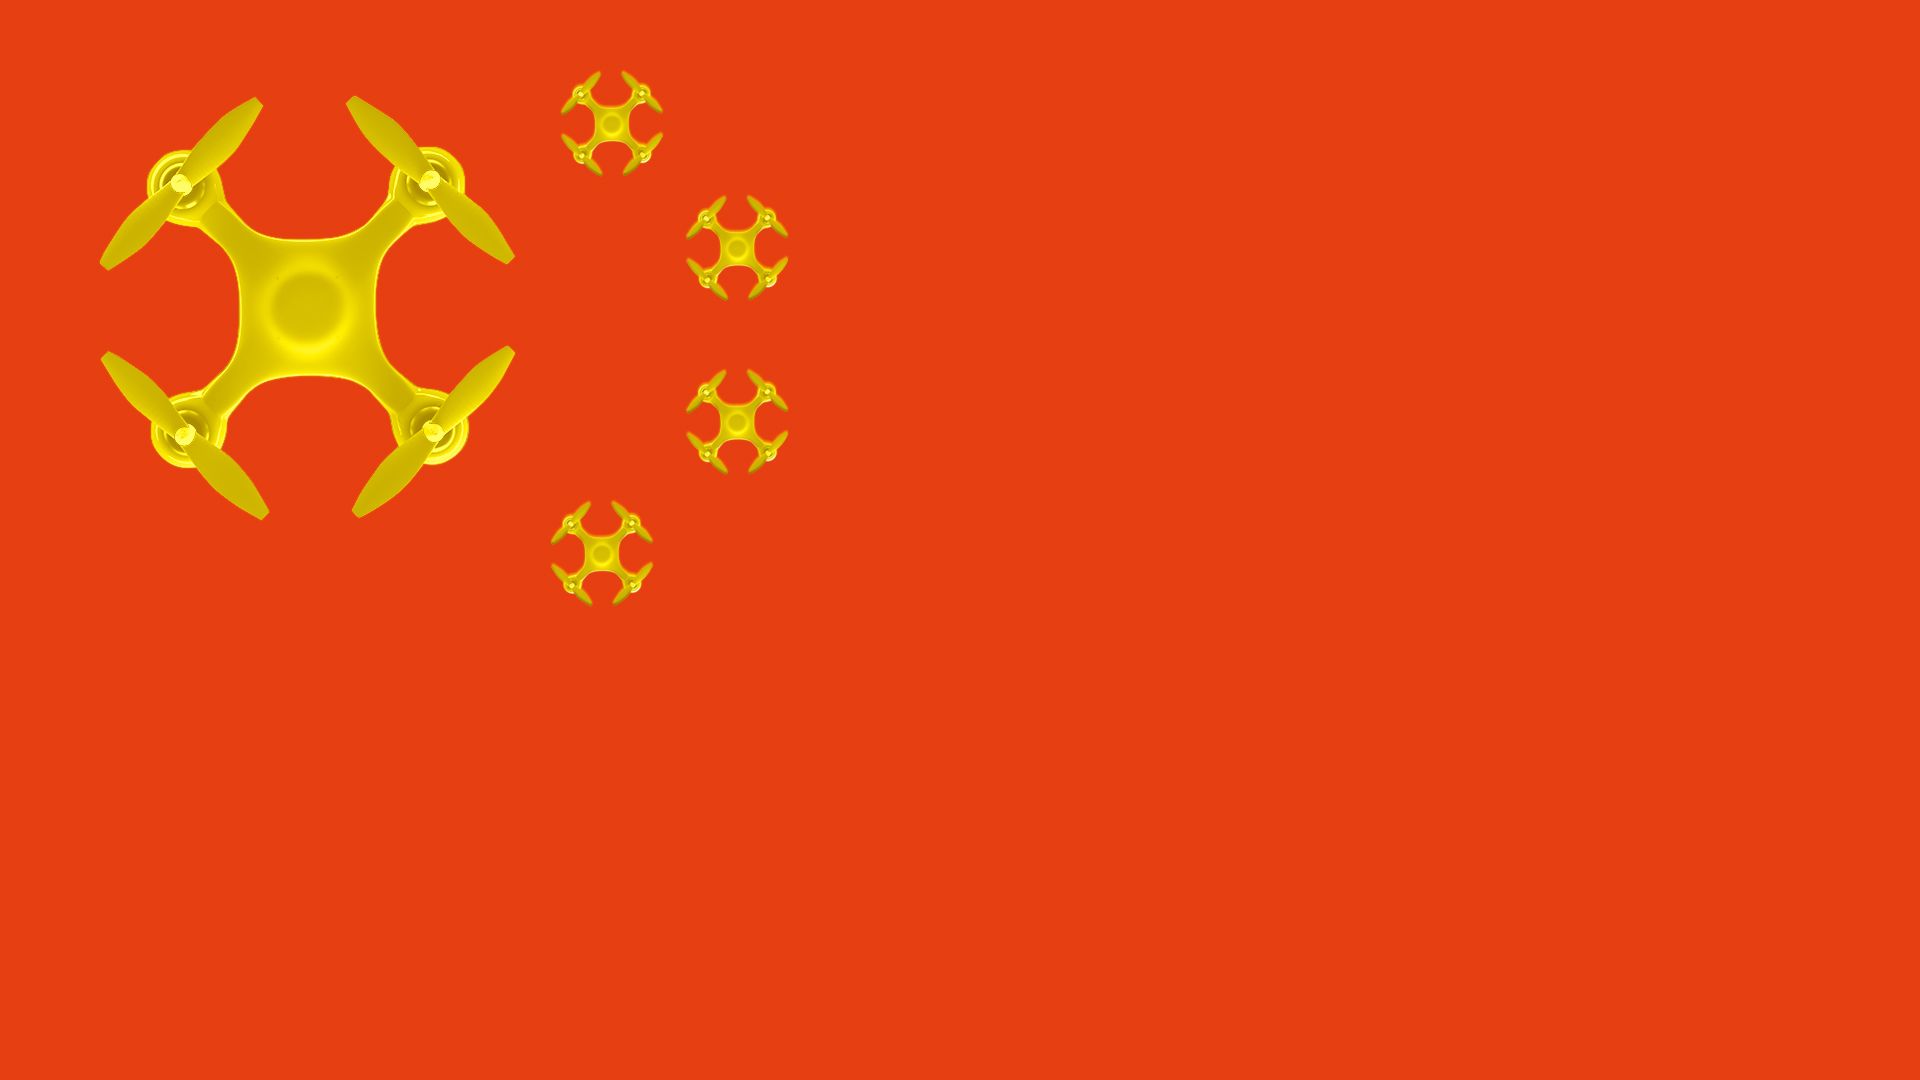 Illustration of a Chinese flag with drones in place of stars